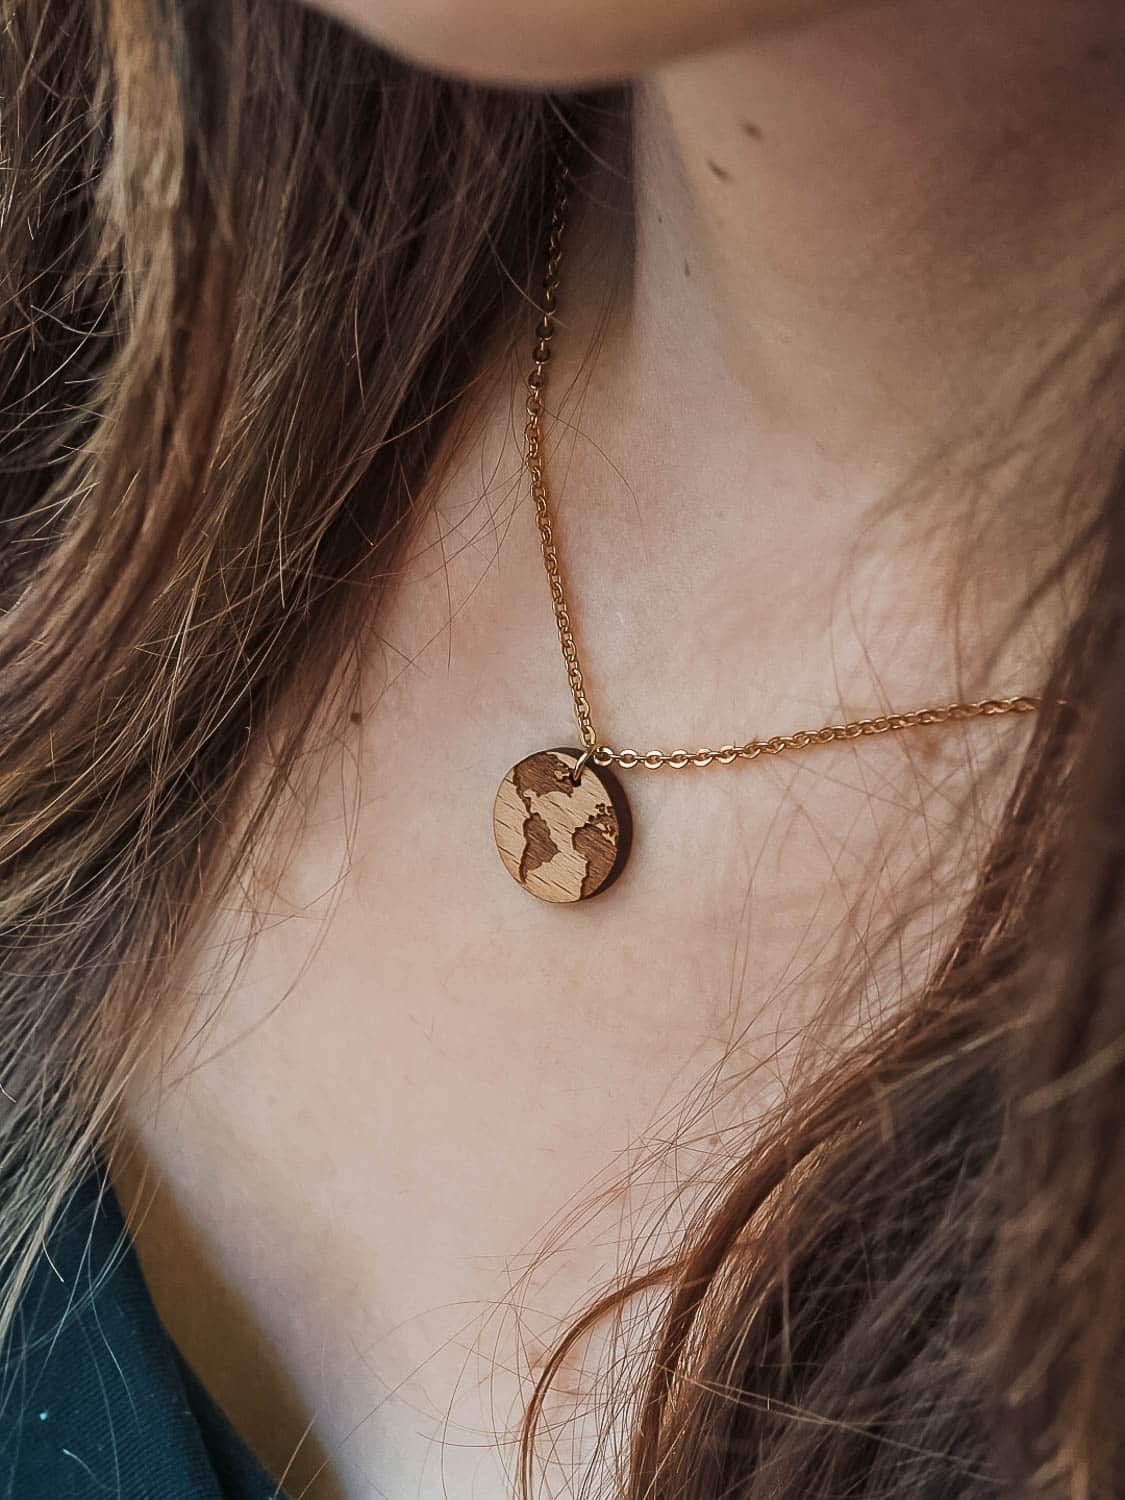 wooden necklace in the shape of the planet earth